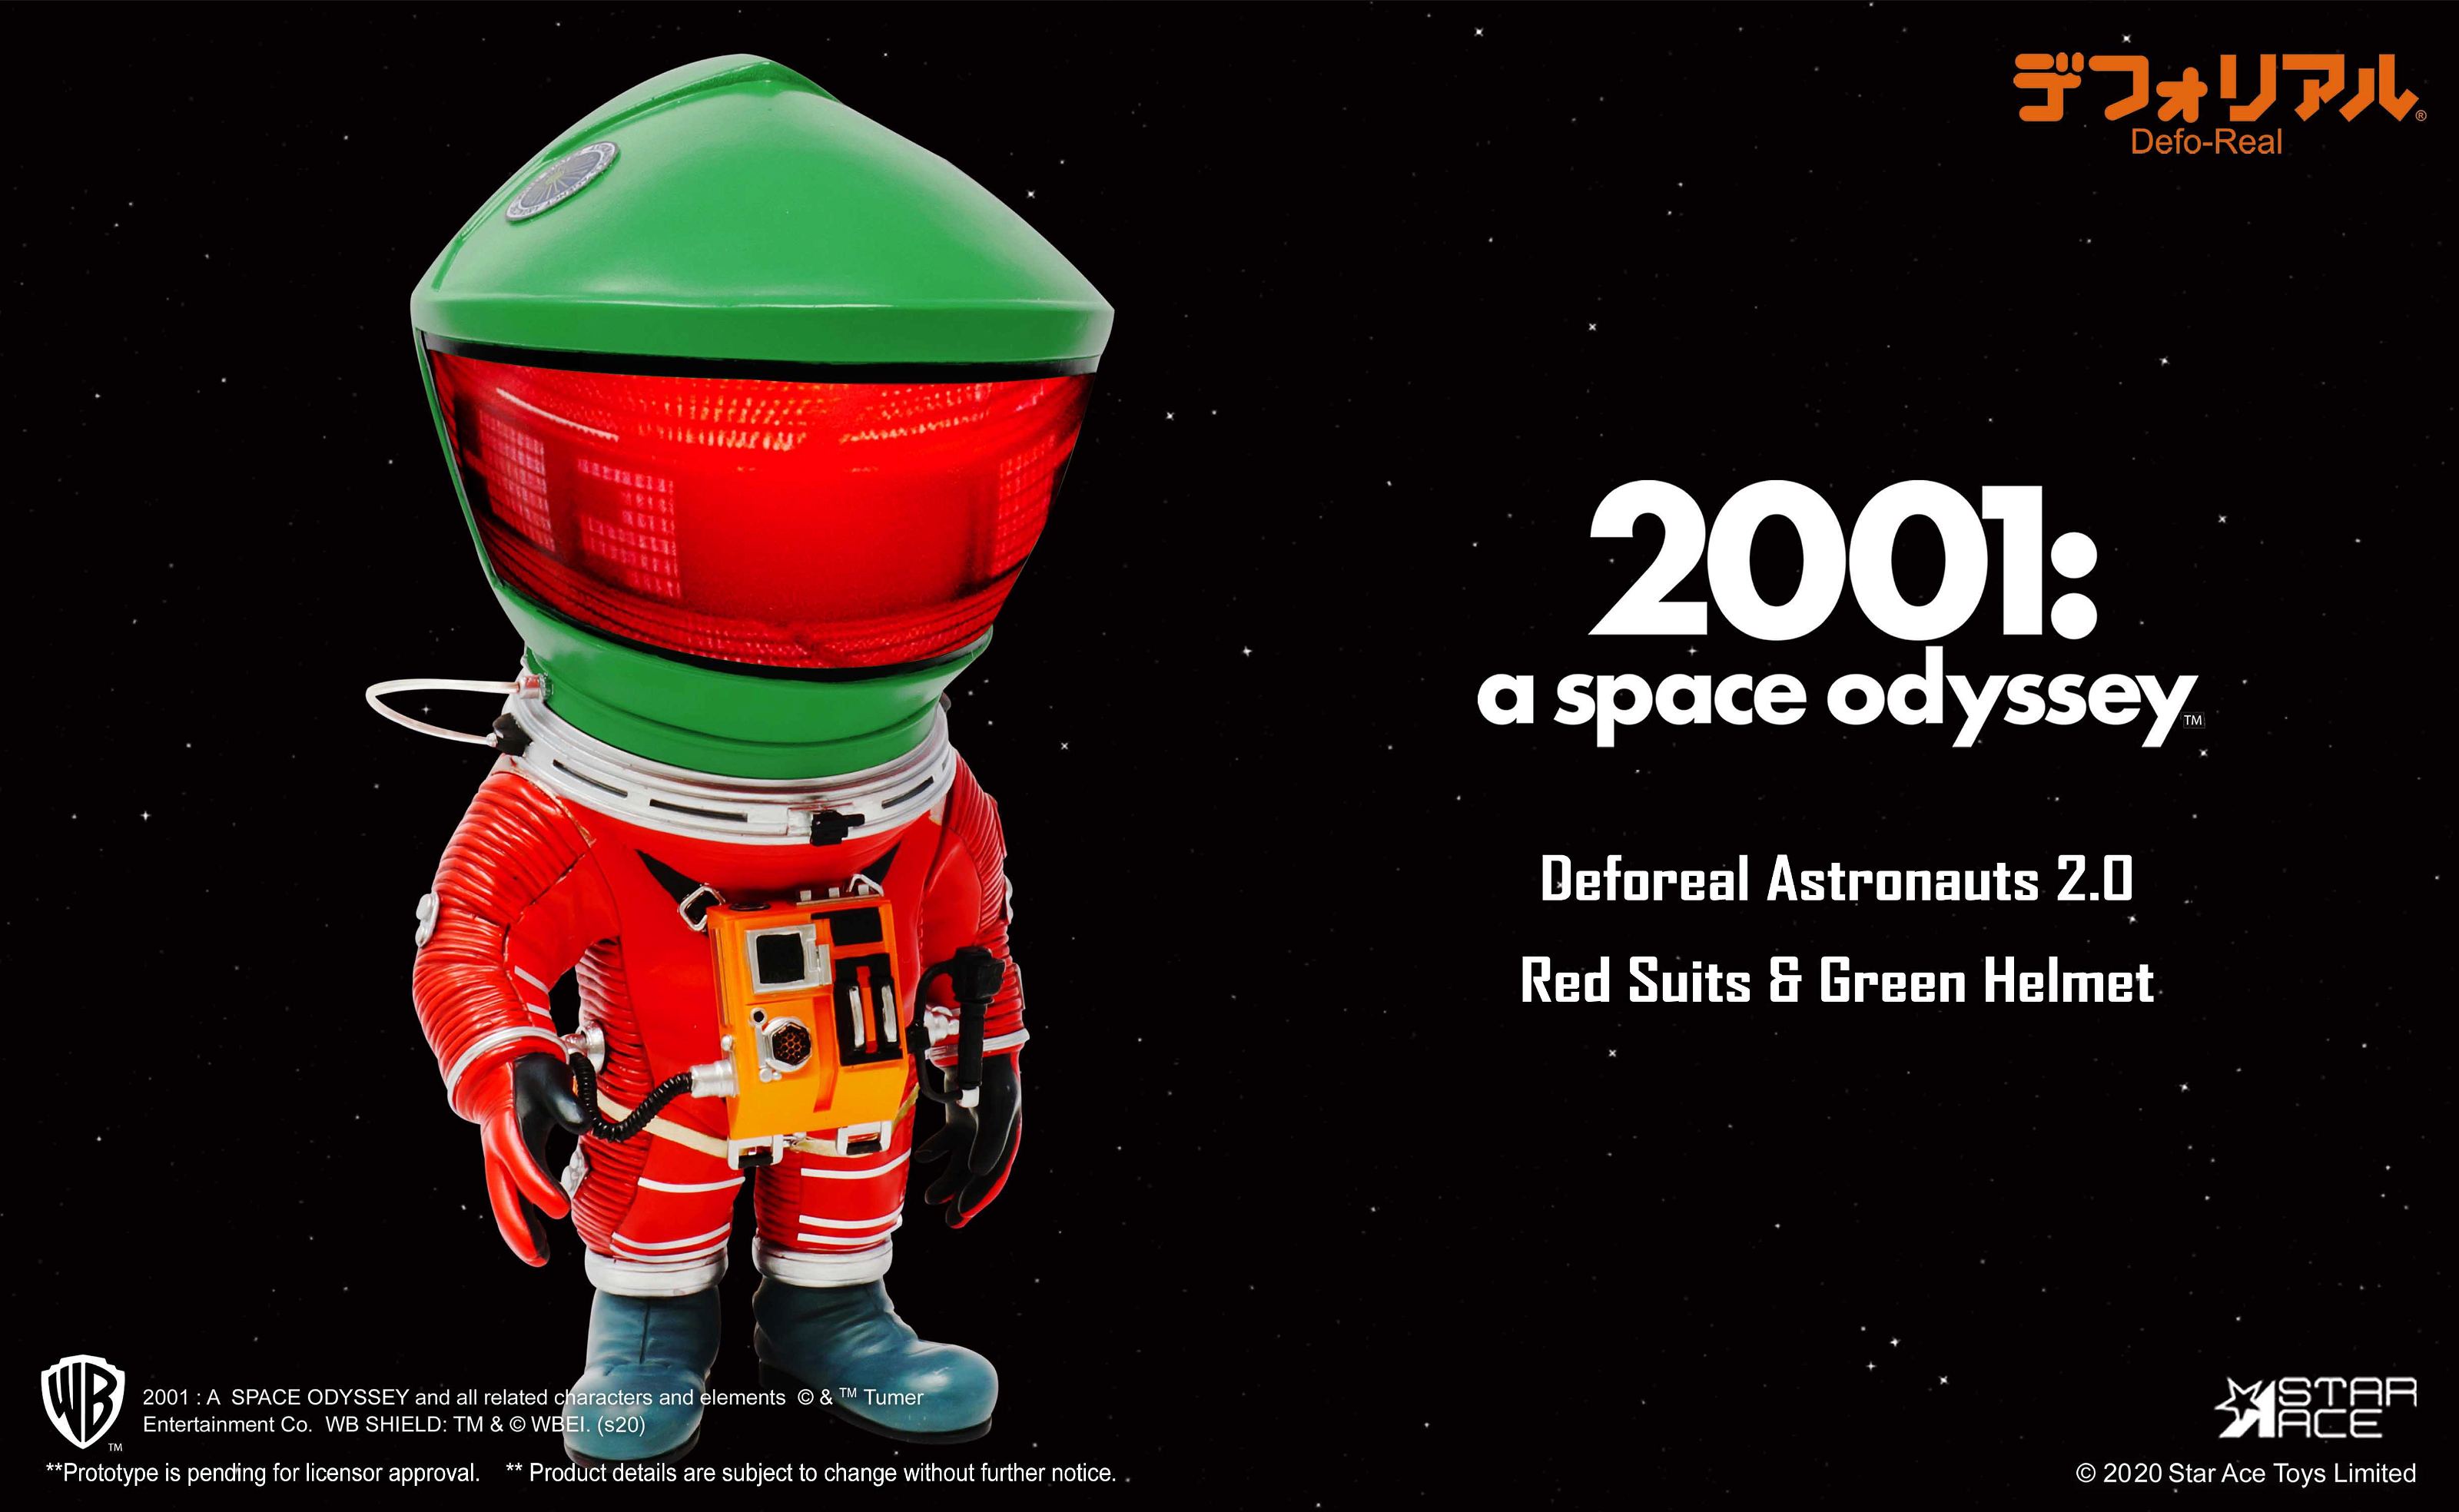 DEFOREAL 2001 A SPACE ODYSSEY: ASTRONAUTS 2.0 RED SUITS & GREEN HELMET Star Ace Toys